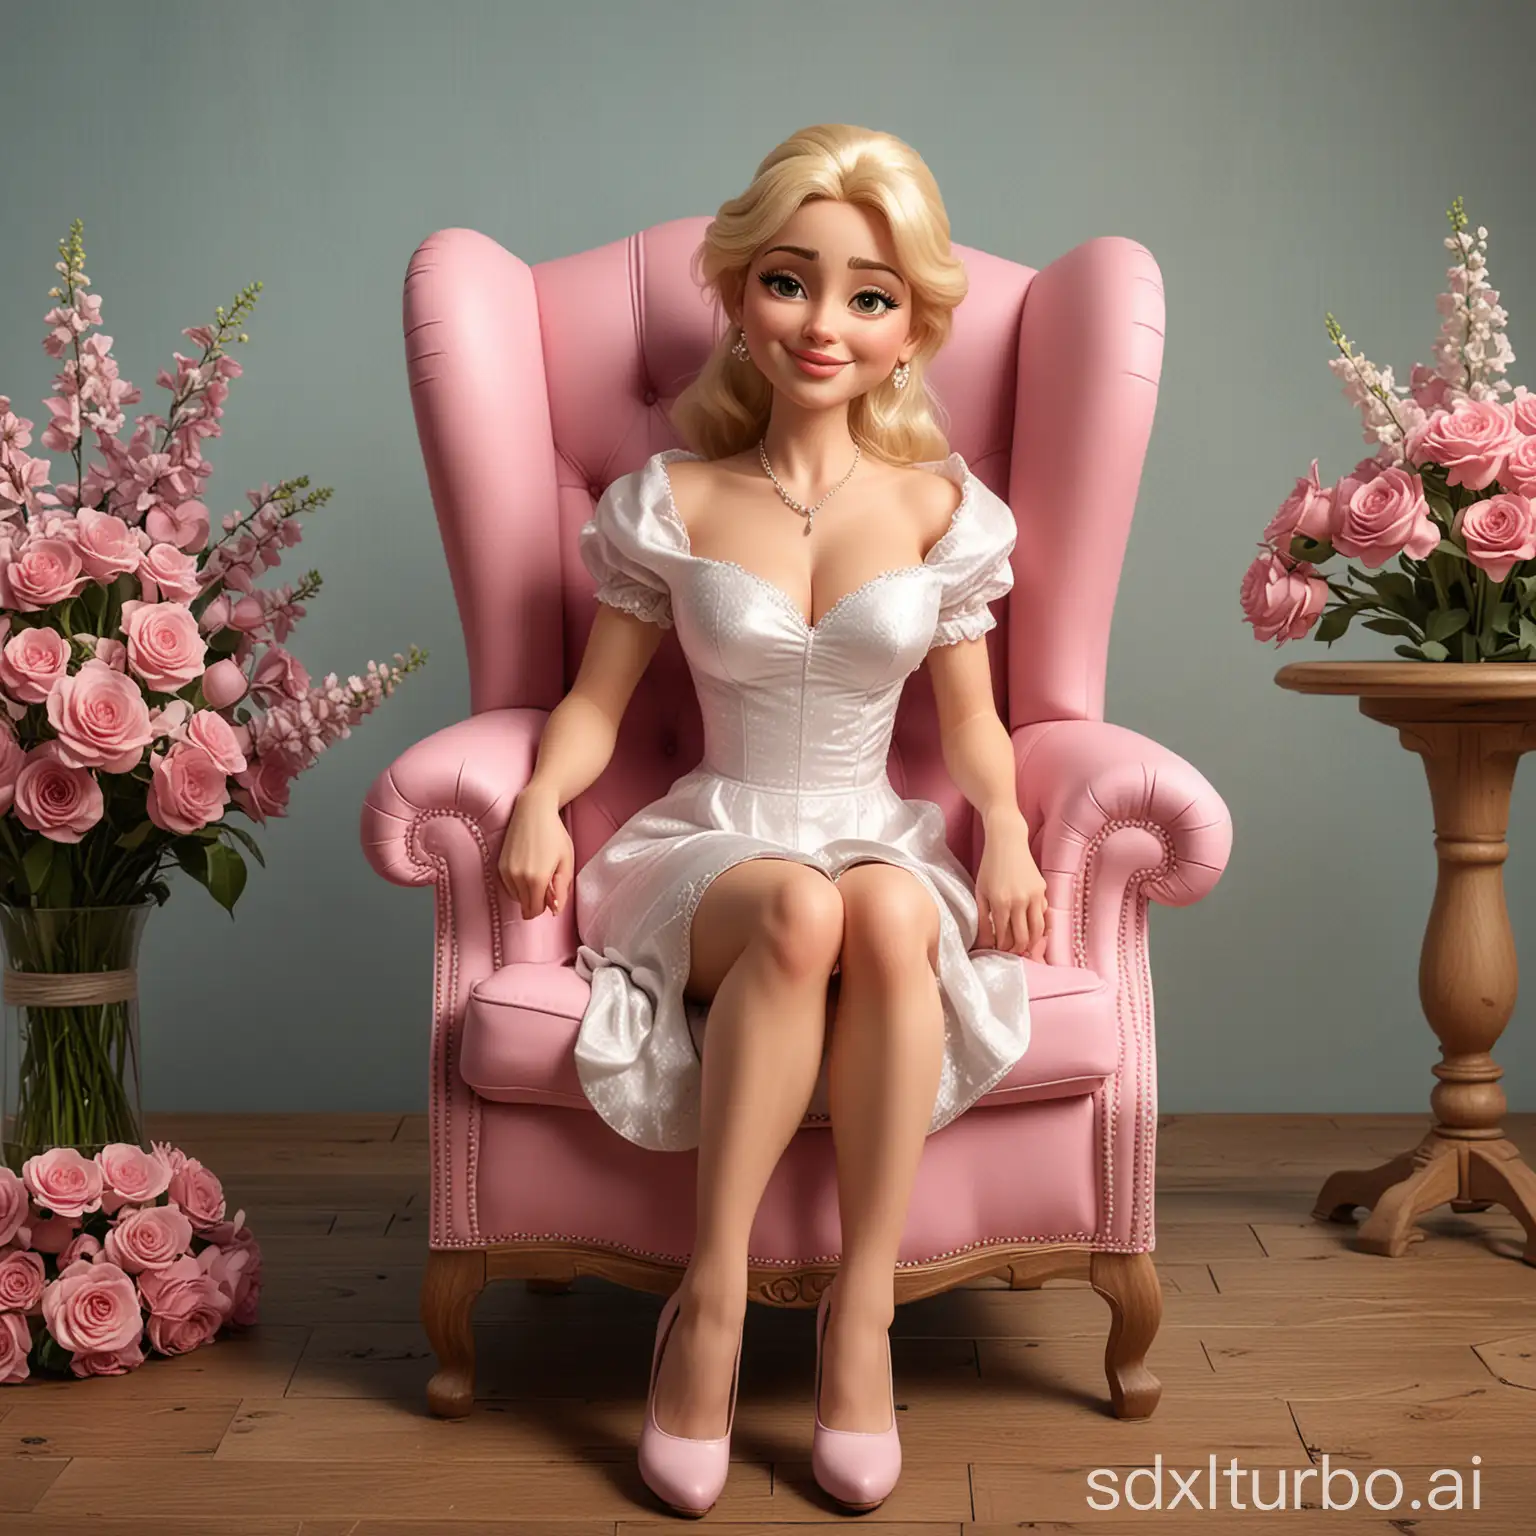 Create a Caricature 3D Realistic Disney pixar style full body with a big head. 'Madonna". A 30 year old woman, is sitting relaxed in a classic pink color wingback wooden chair, the wood texture is clear. Wearing a Madonna wedding dress in 1985. Sit with your legs crossed, right hand holds a bouquet of flowers, your left hand placed on the edge of the chair. The background should contrast with the color of the chair and clothing,enhancing the overall composition of the picture. Use soft photography lighting, dramatic overhead lighting, very high image quality, clear character details, UHD, 16k.